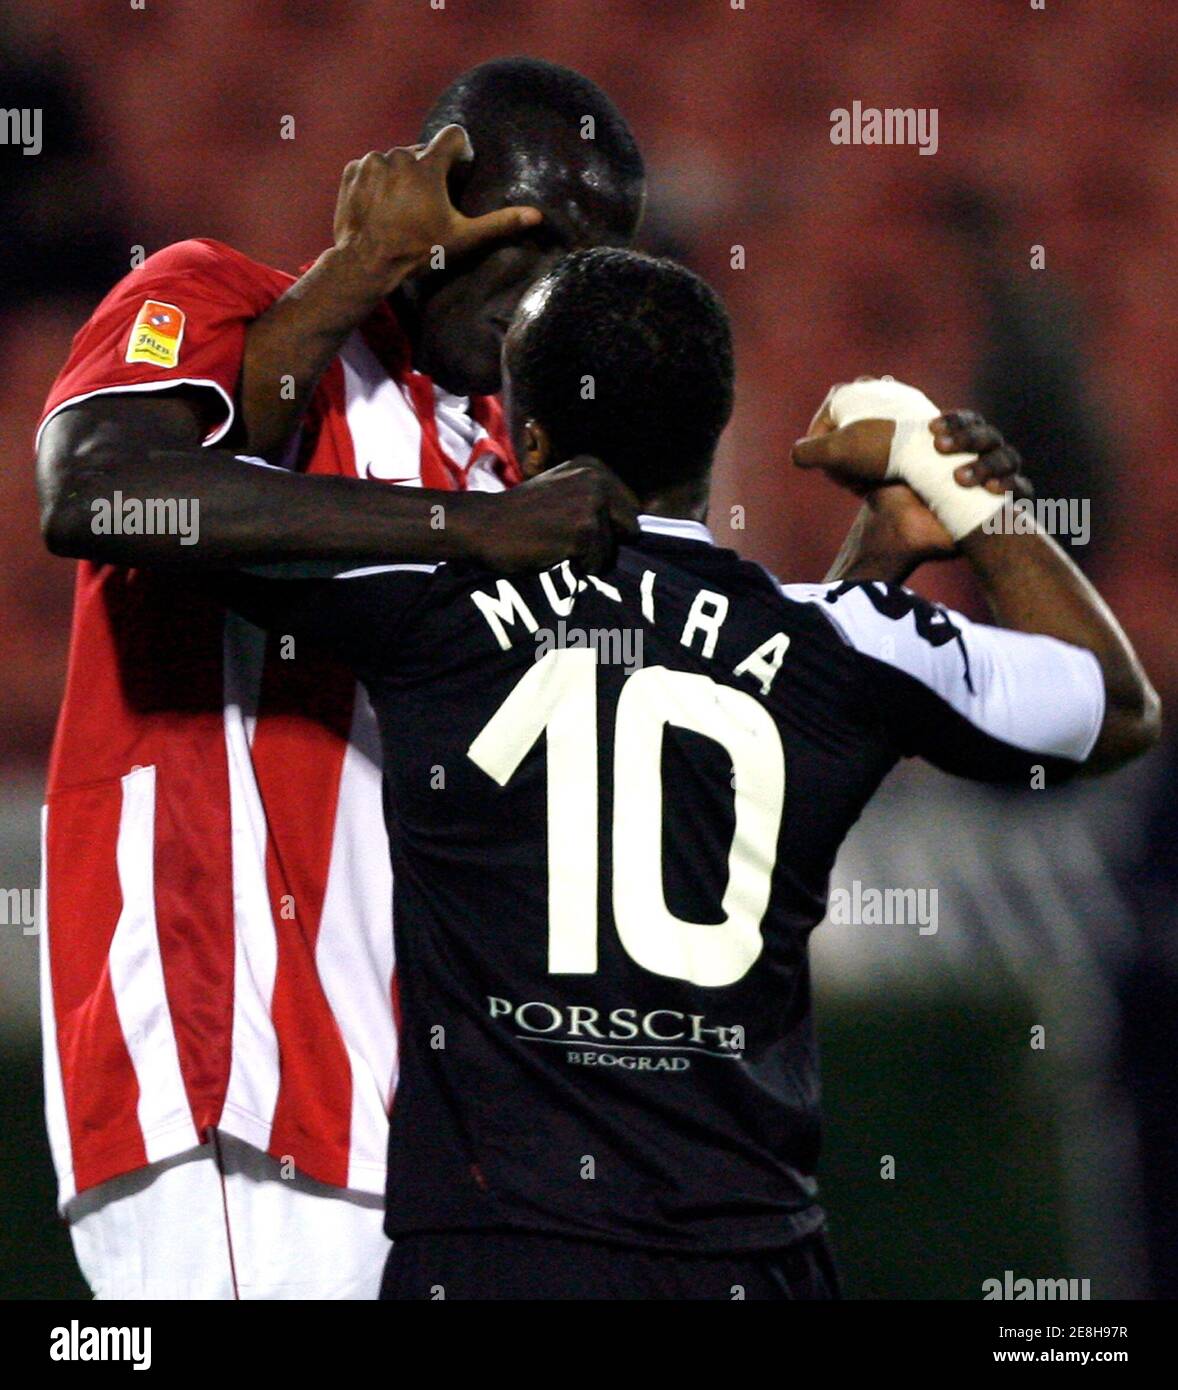 Red Star's Ibrahima Gueye (L) scuffles with Partizan's Almani Moreira during their Serbia first division derby soccer match in Belgrade October 5, 2008.  REUTERS/Ivan Milutinovic  (SERBIA) Stock Photo